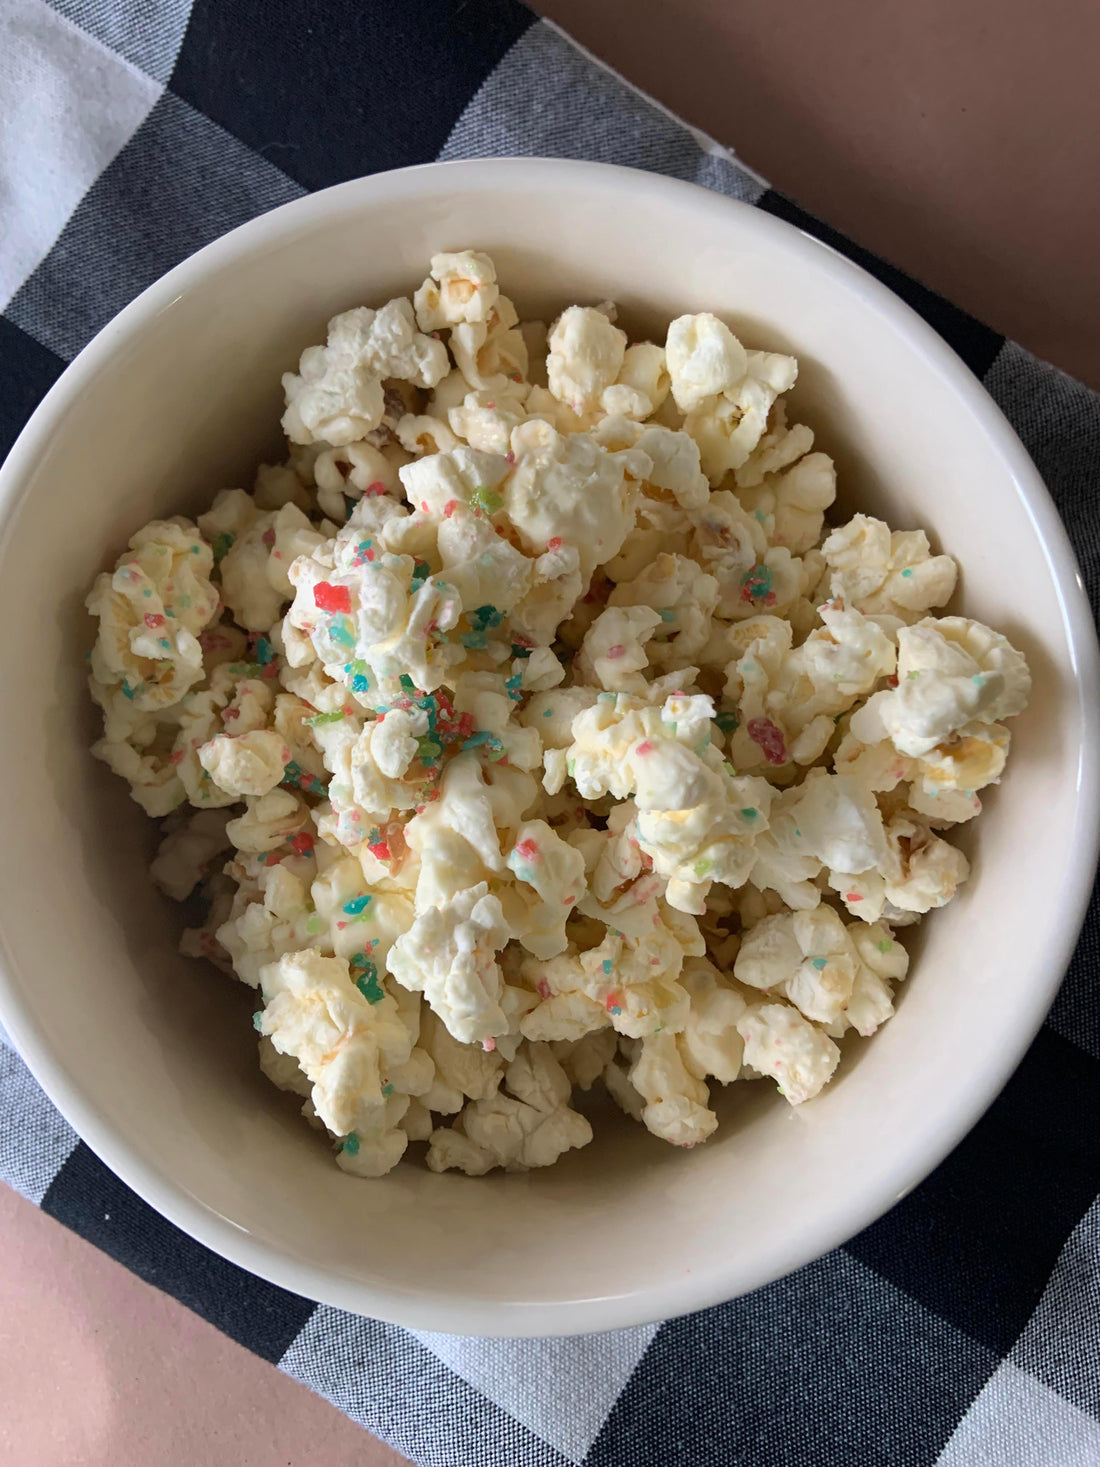 New Years Eve Recipes for Kids : Pop Rock Popcorn and Italian Sodas - Subscription Box Kids